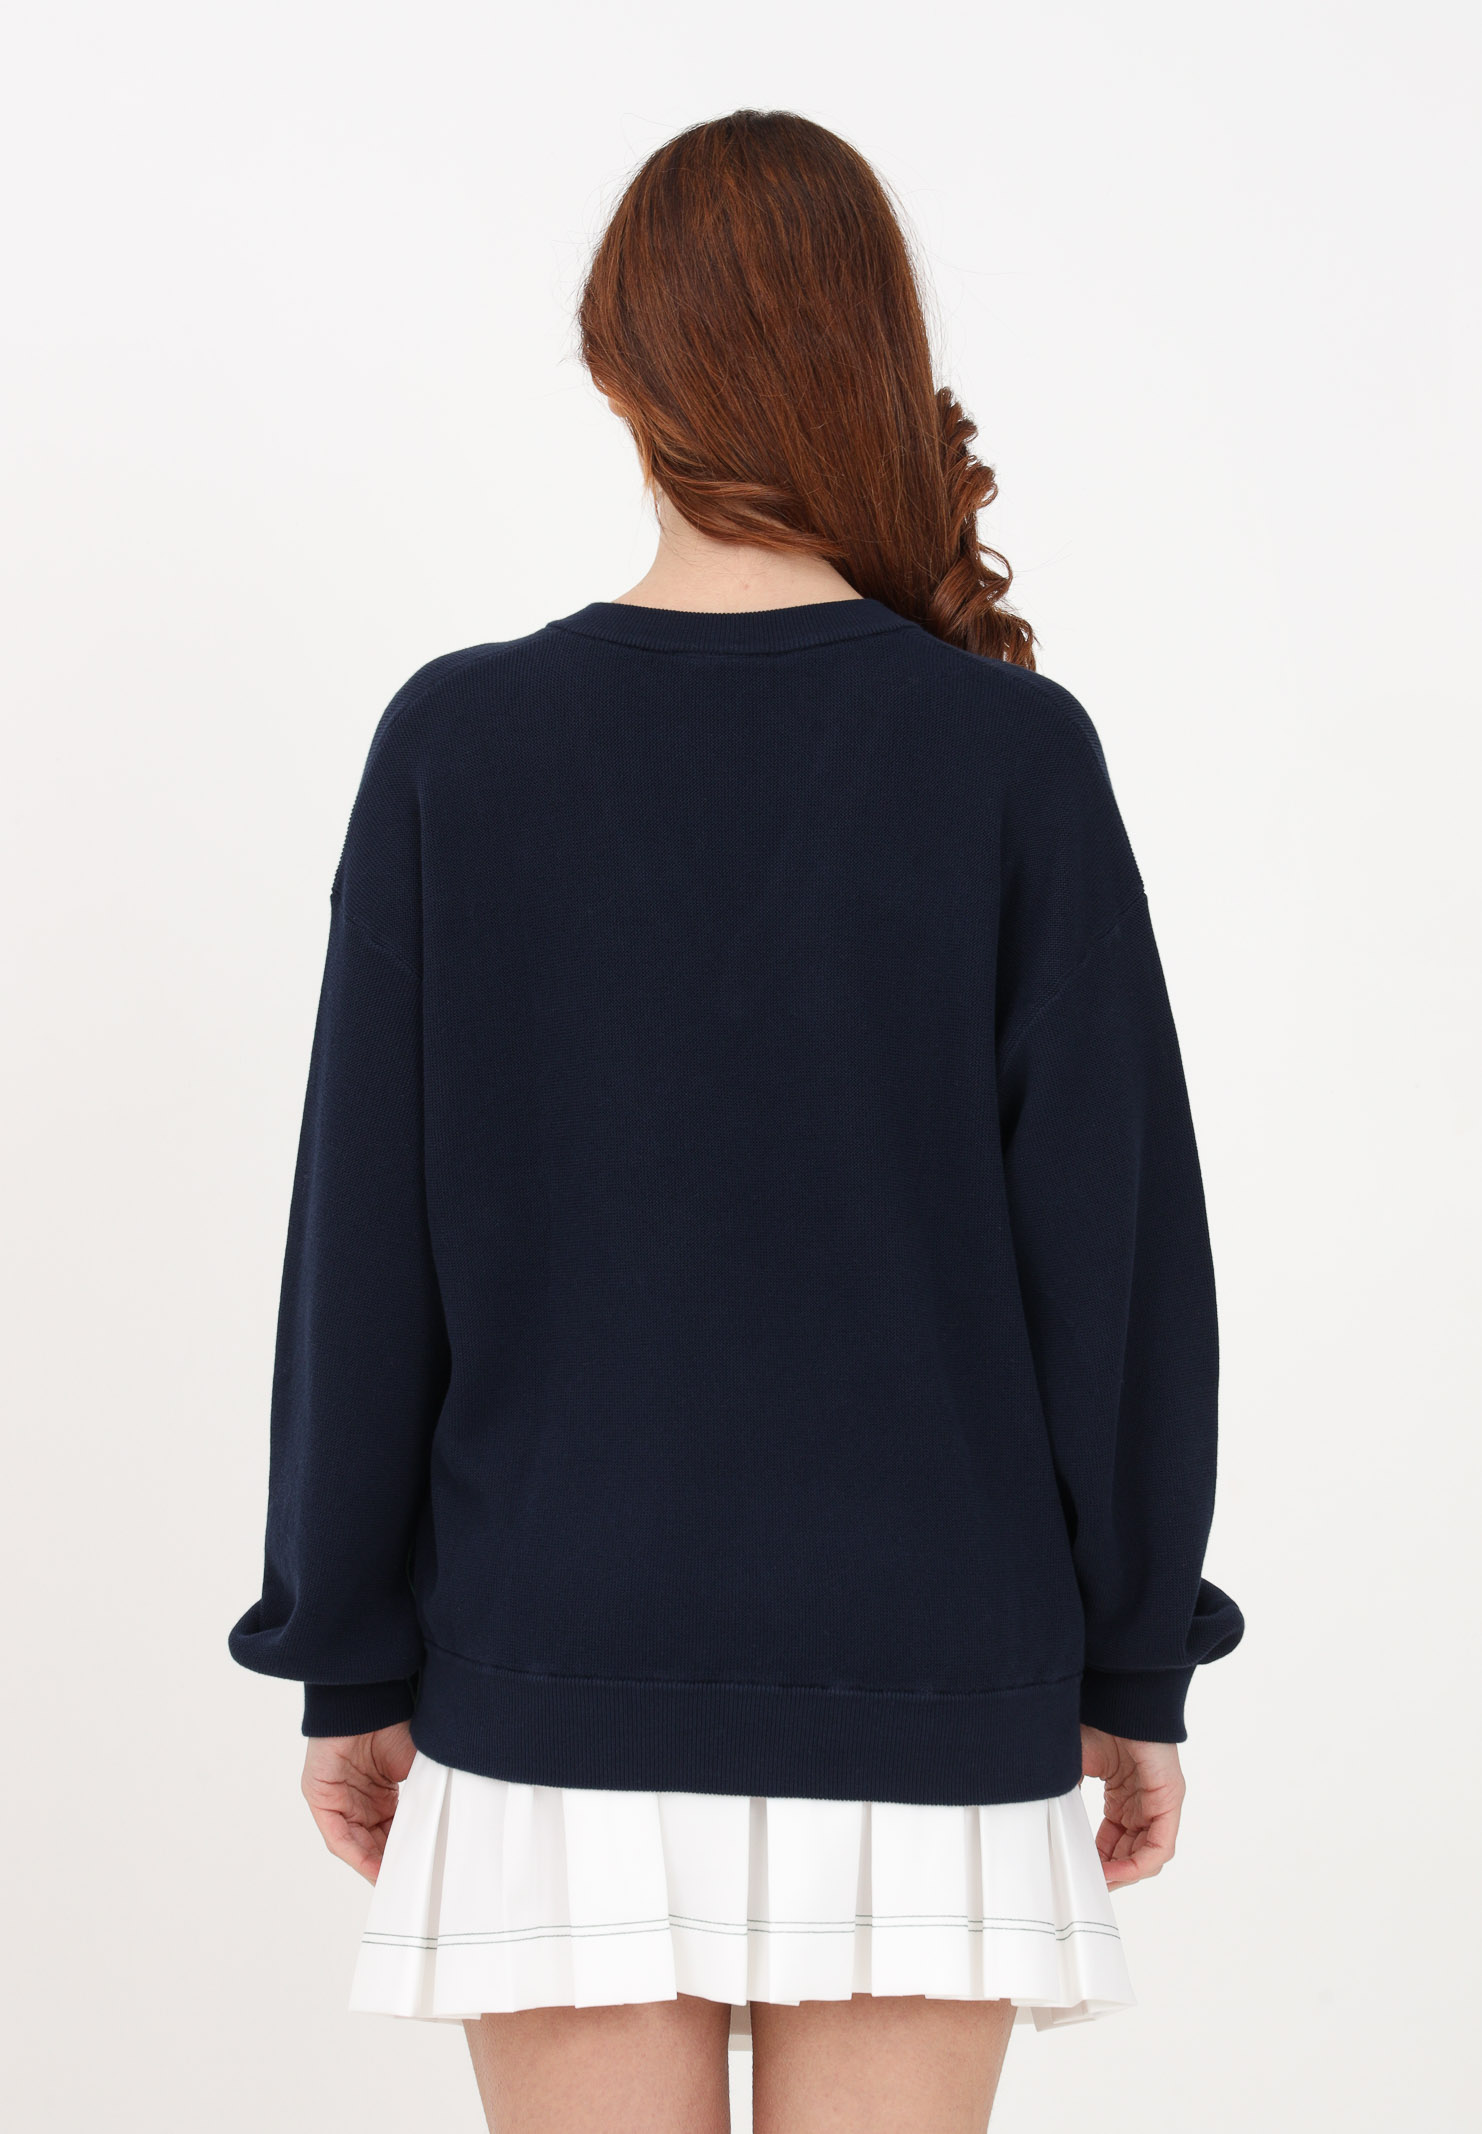 Women's blue long-sleeved sweater with crocodile patch LACOSTE | AF5622166